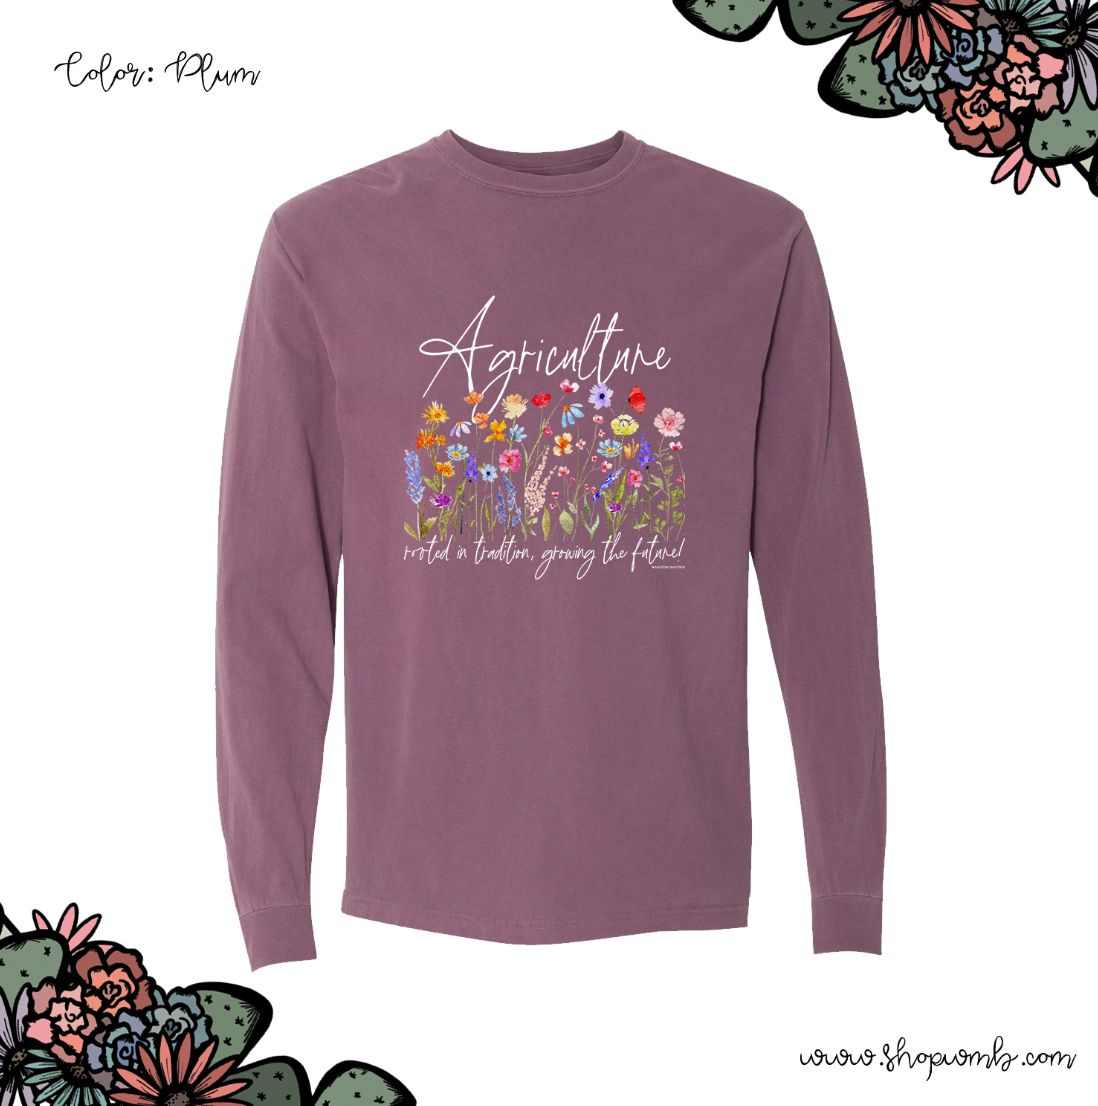 Agriculture Rooted In Tradition Flowers LONG SLEEVE T-Shirt (S-3XL) - Multiple Colors!